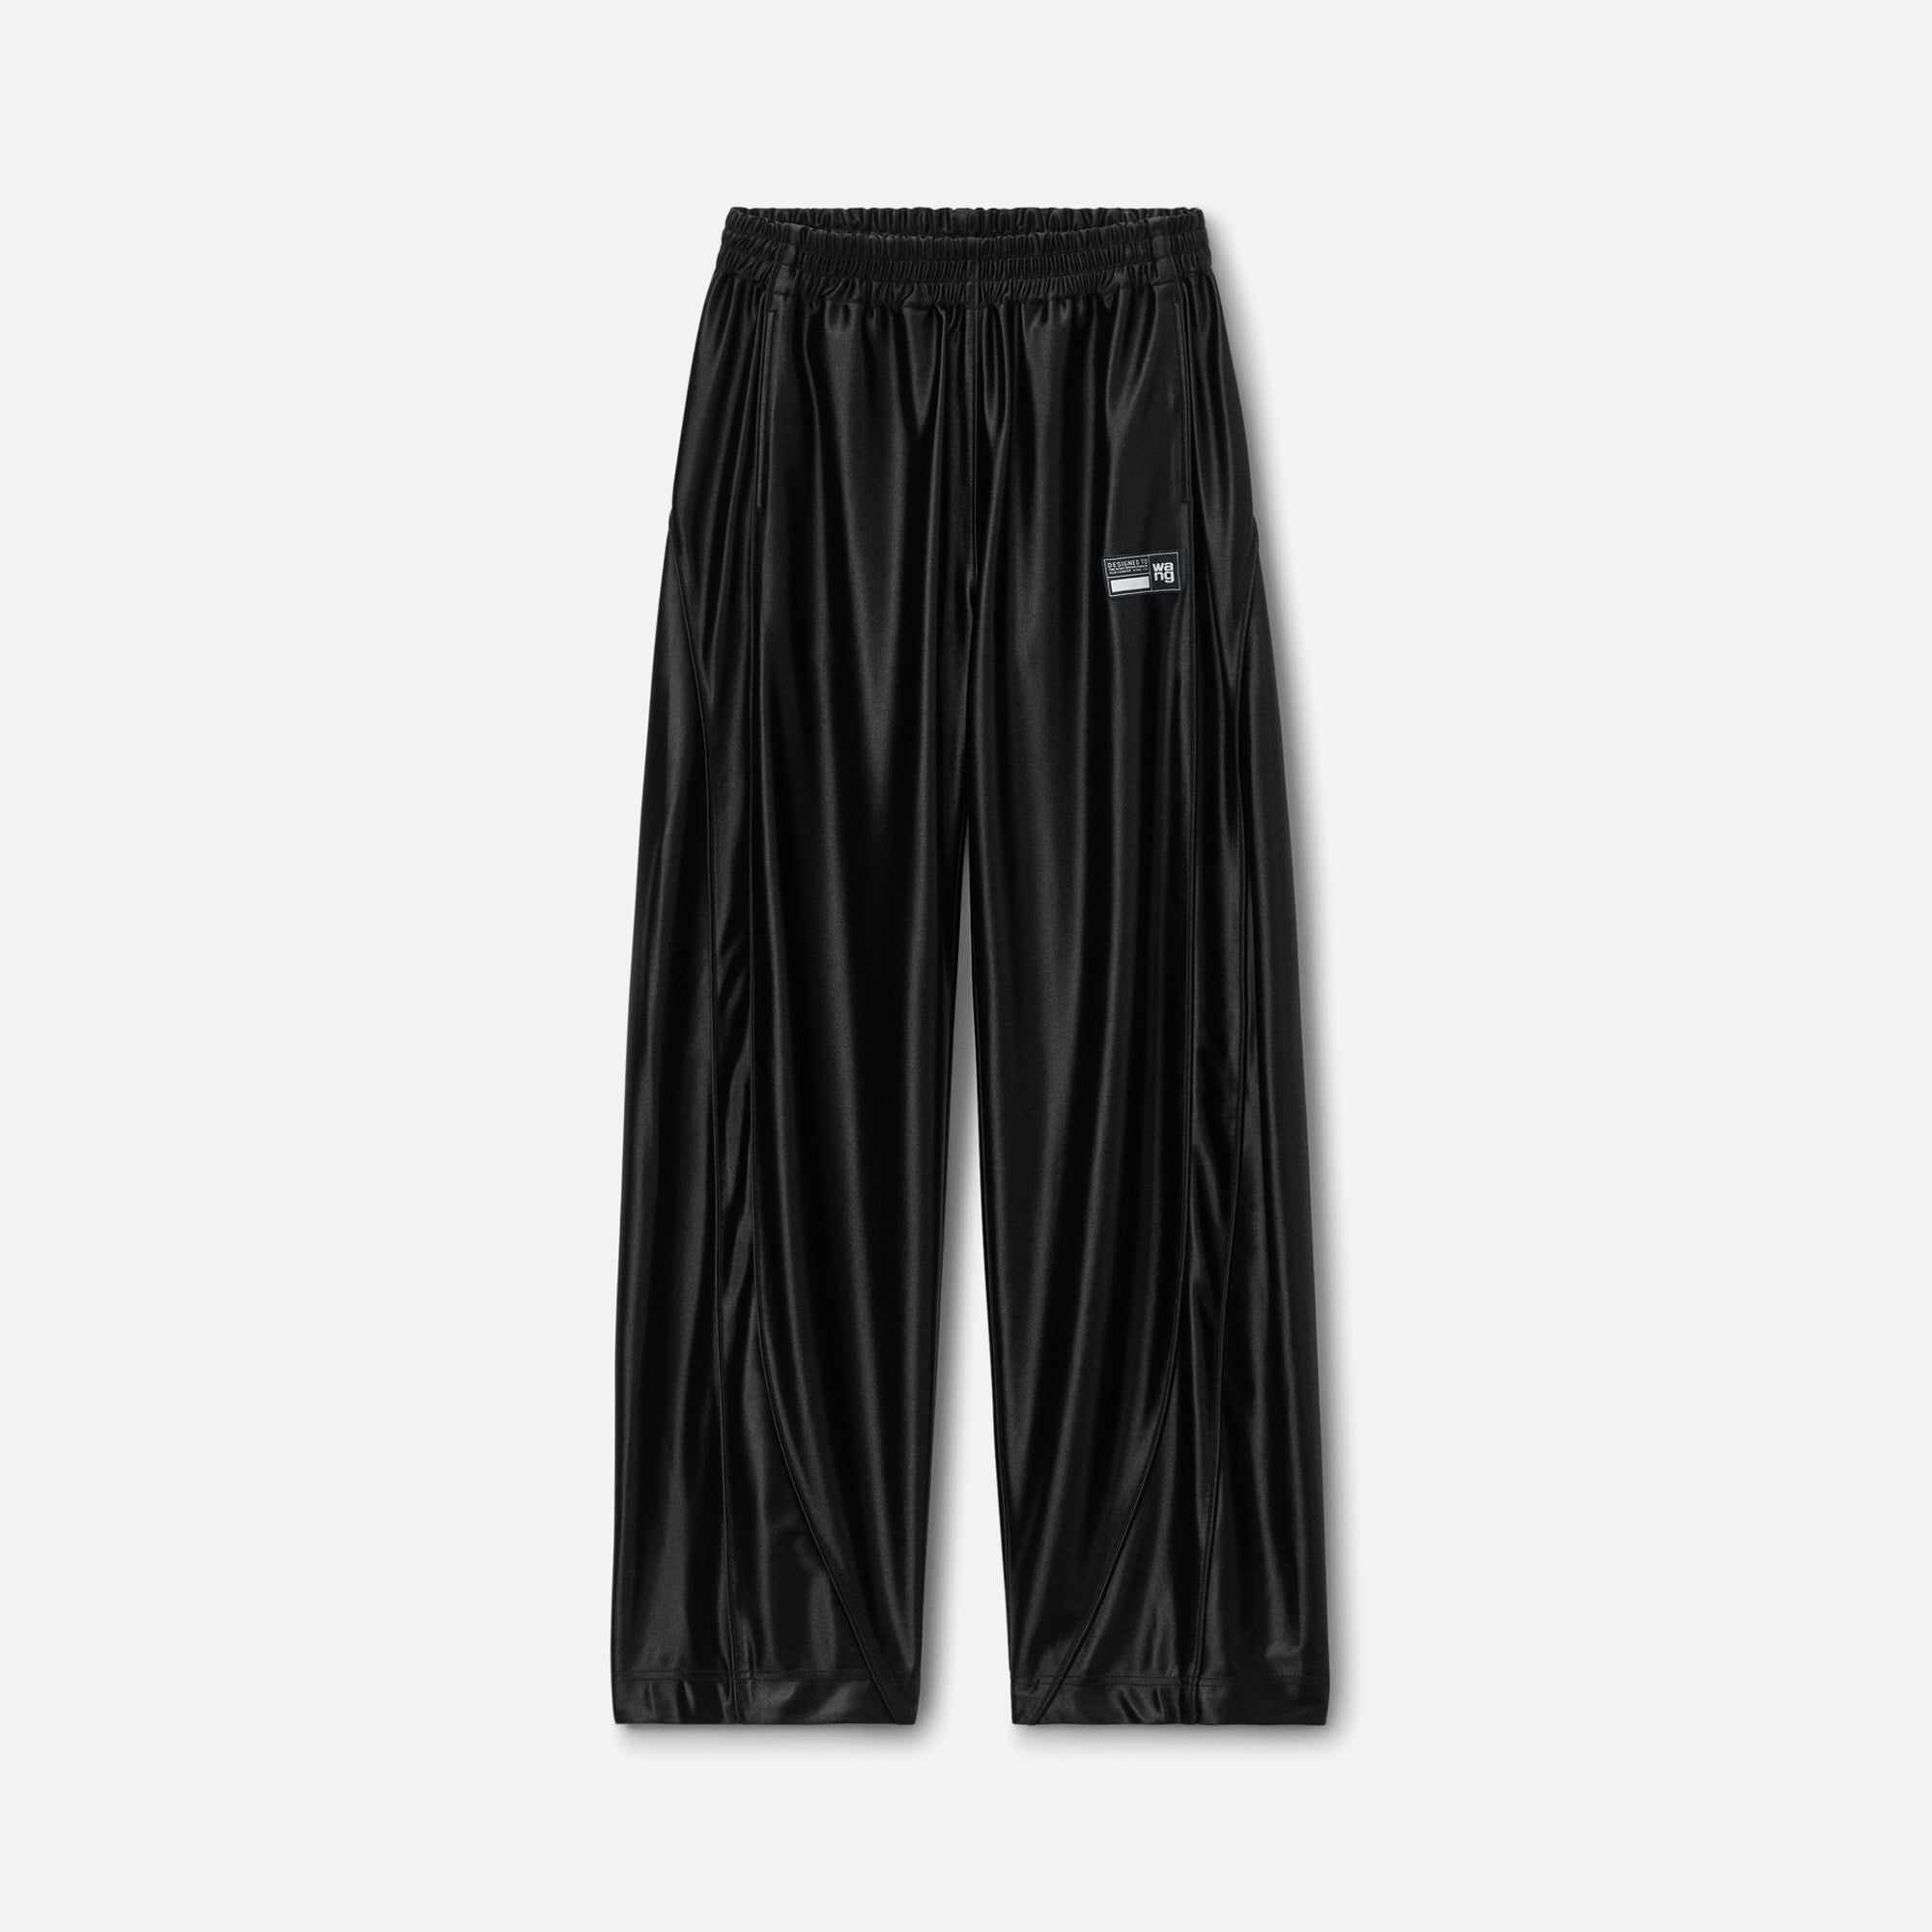 T by Alexander Wang Trackpant with Piping - Black S